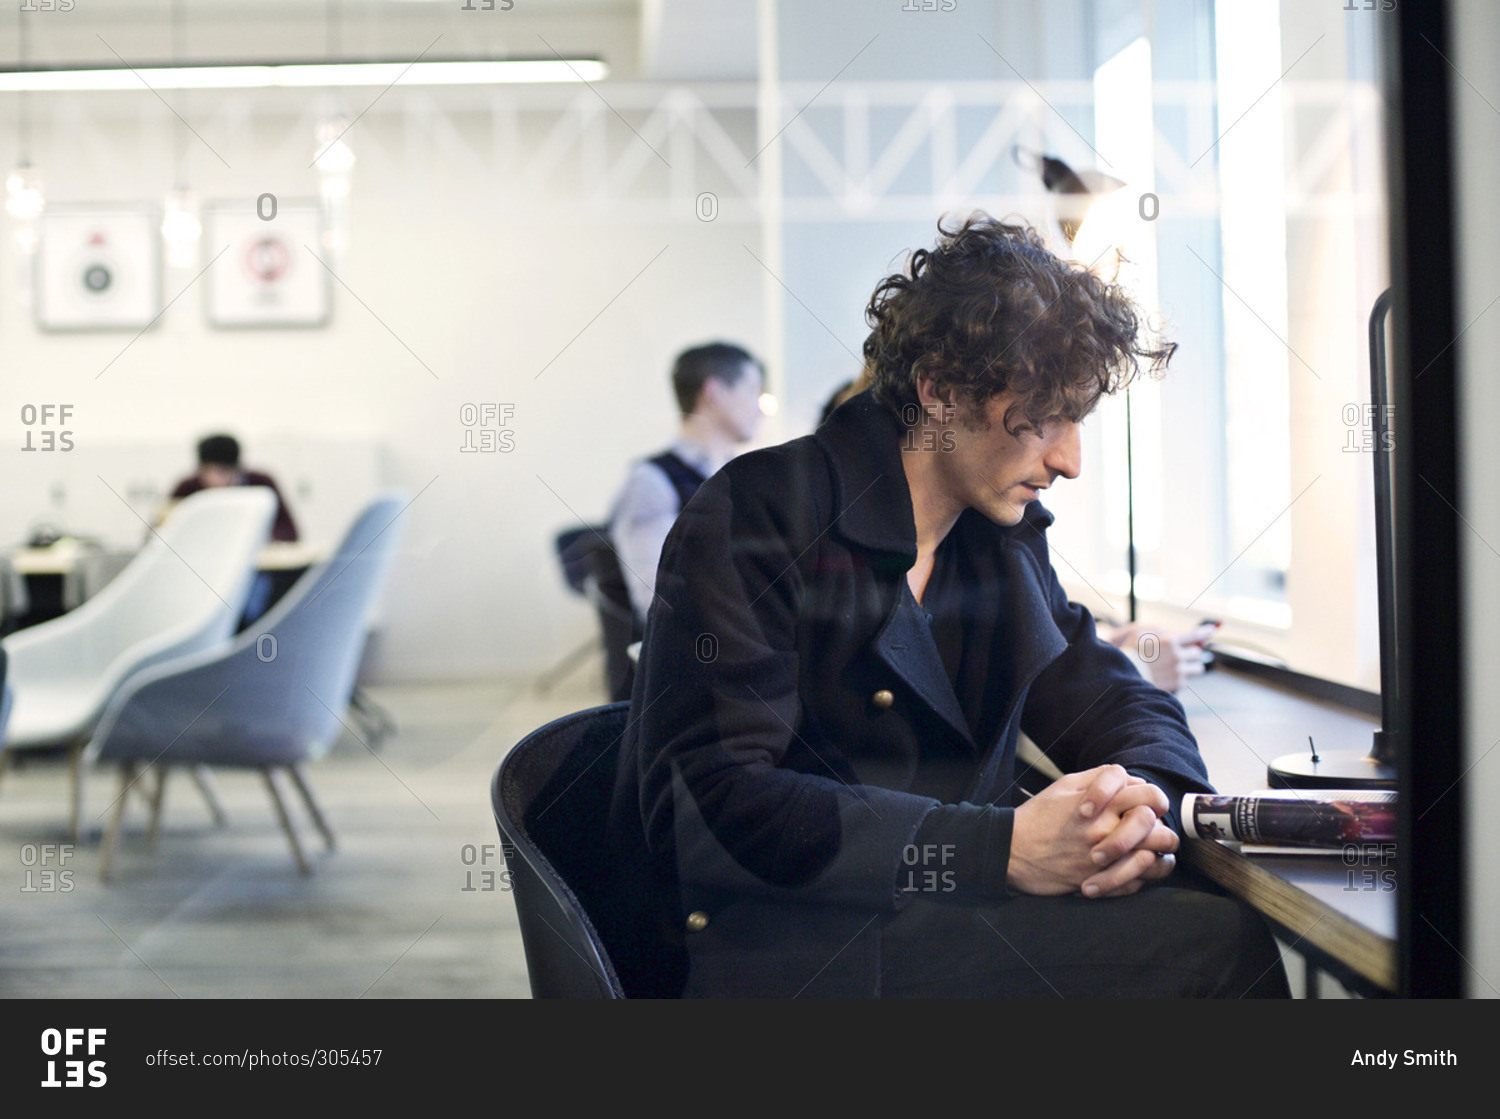 Man reading a magazine at an office work station